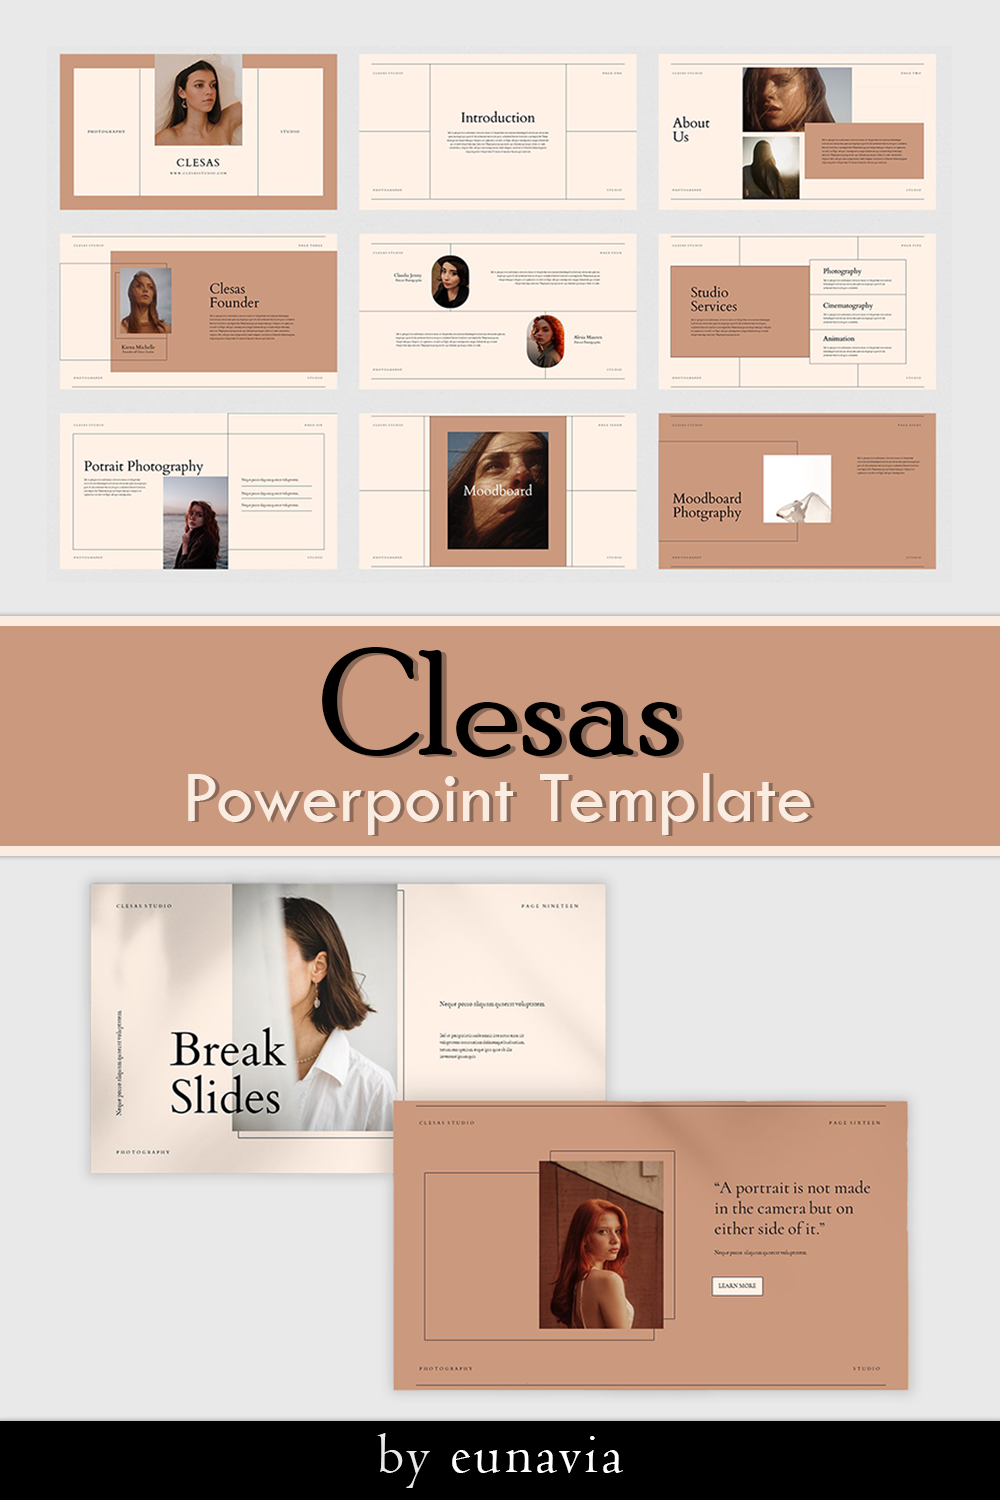 Clesas powerpoint template of pinterest.